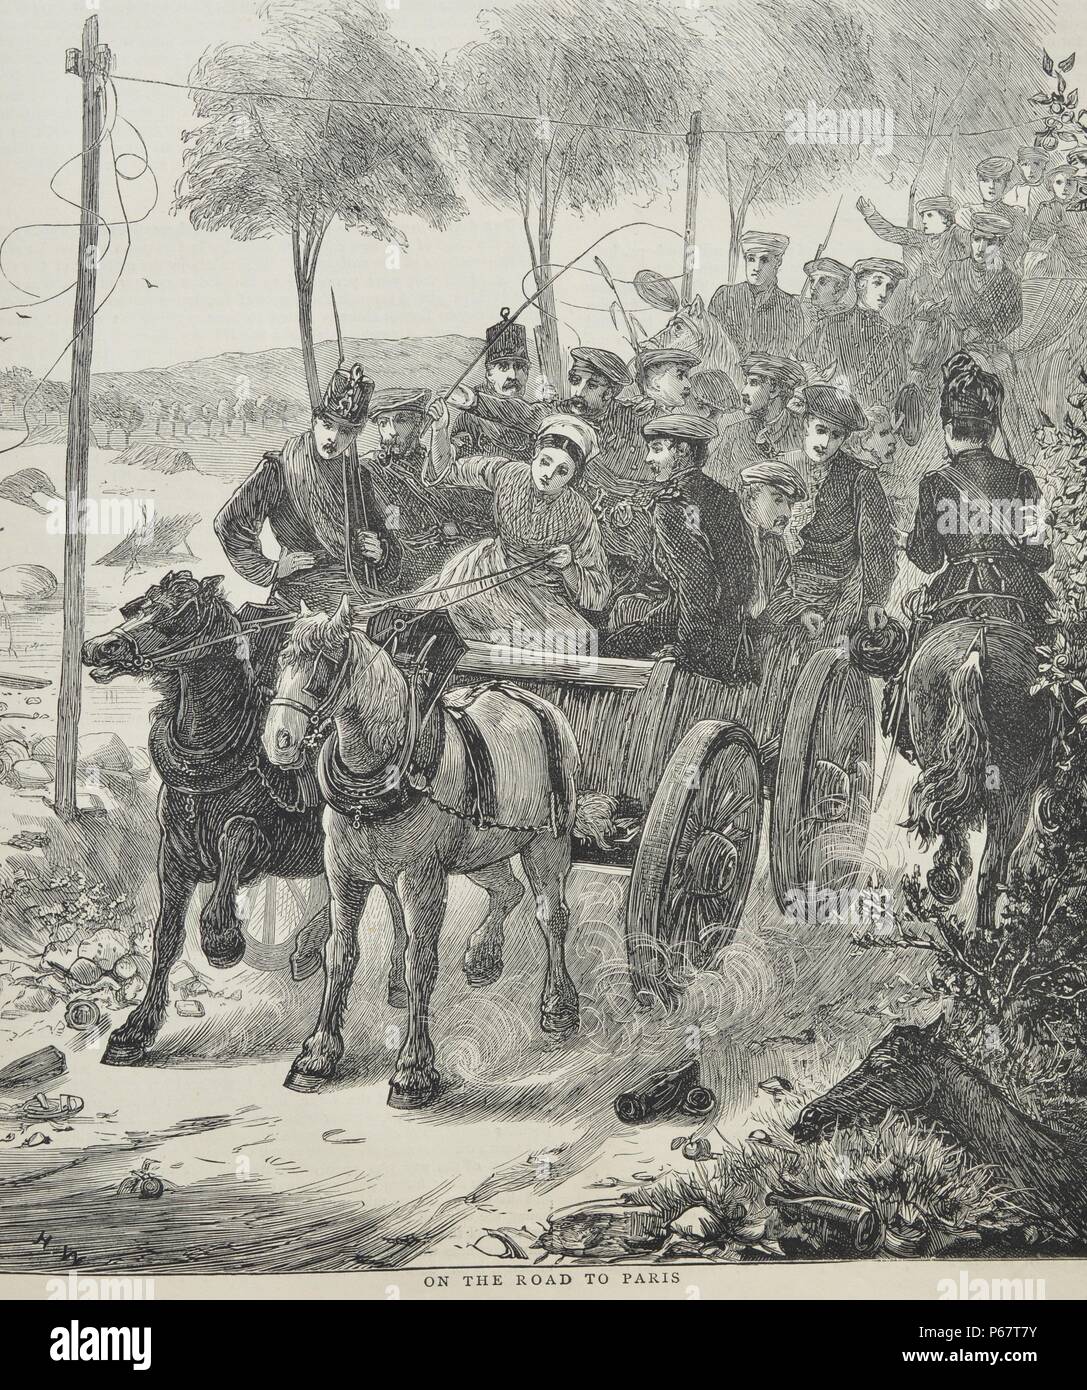 Engraving depicting passengers on the road to Paris. Dated 1870 Stock Photo